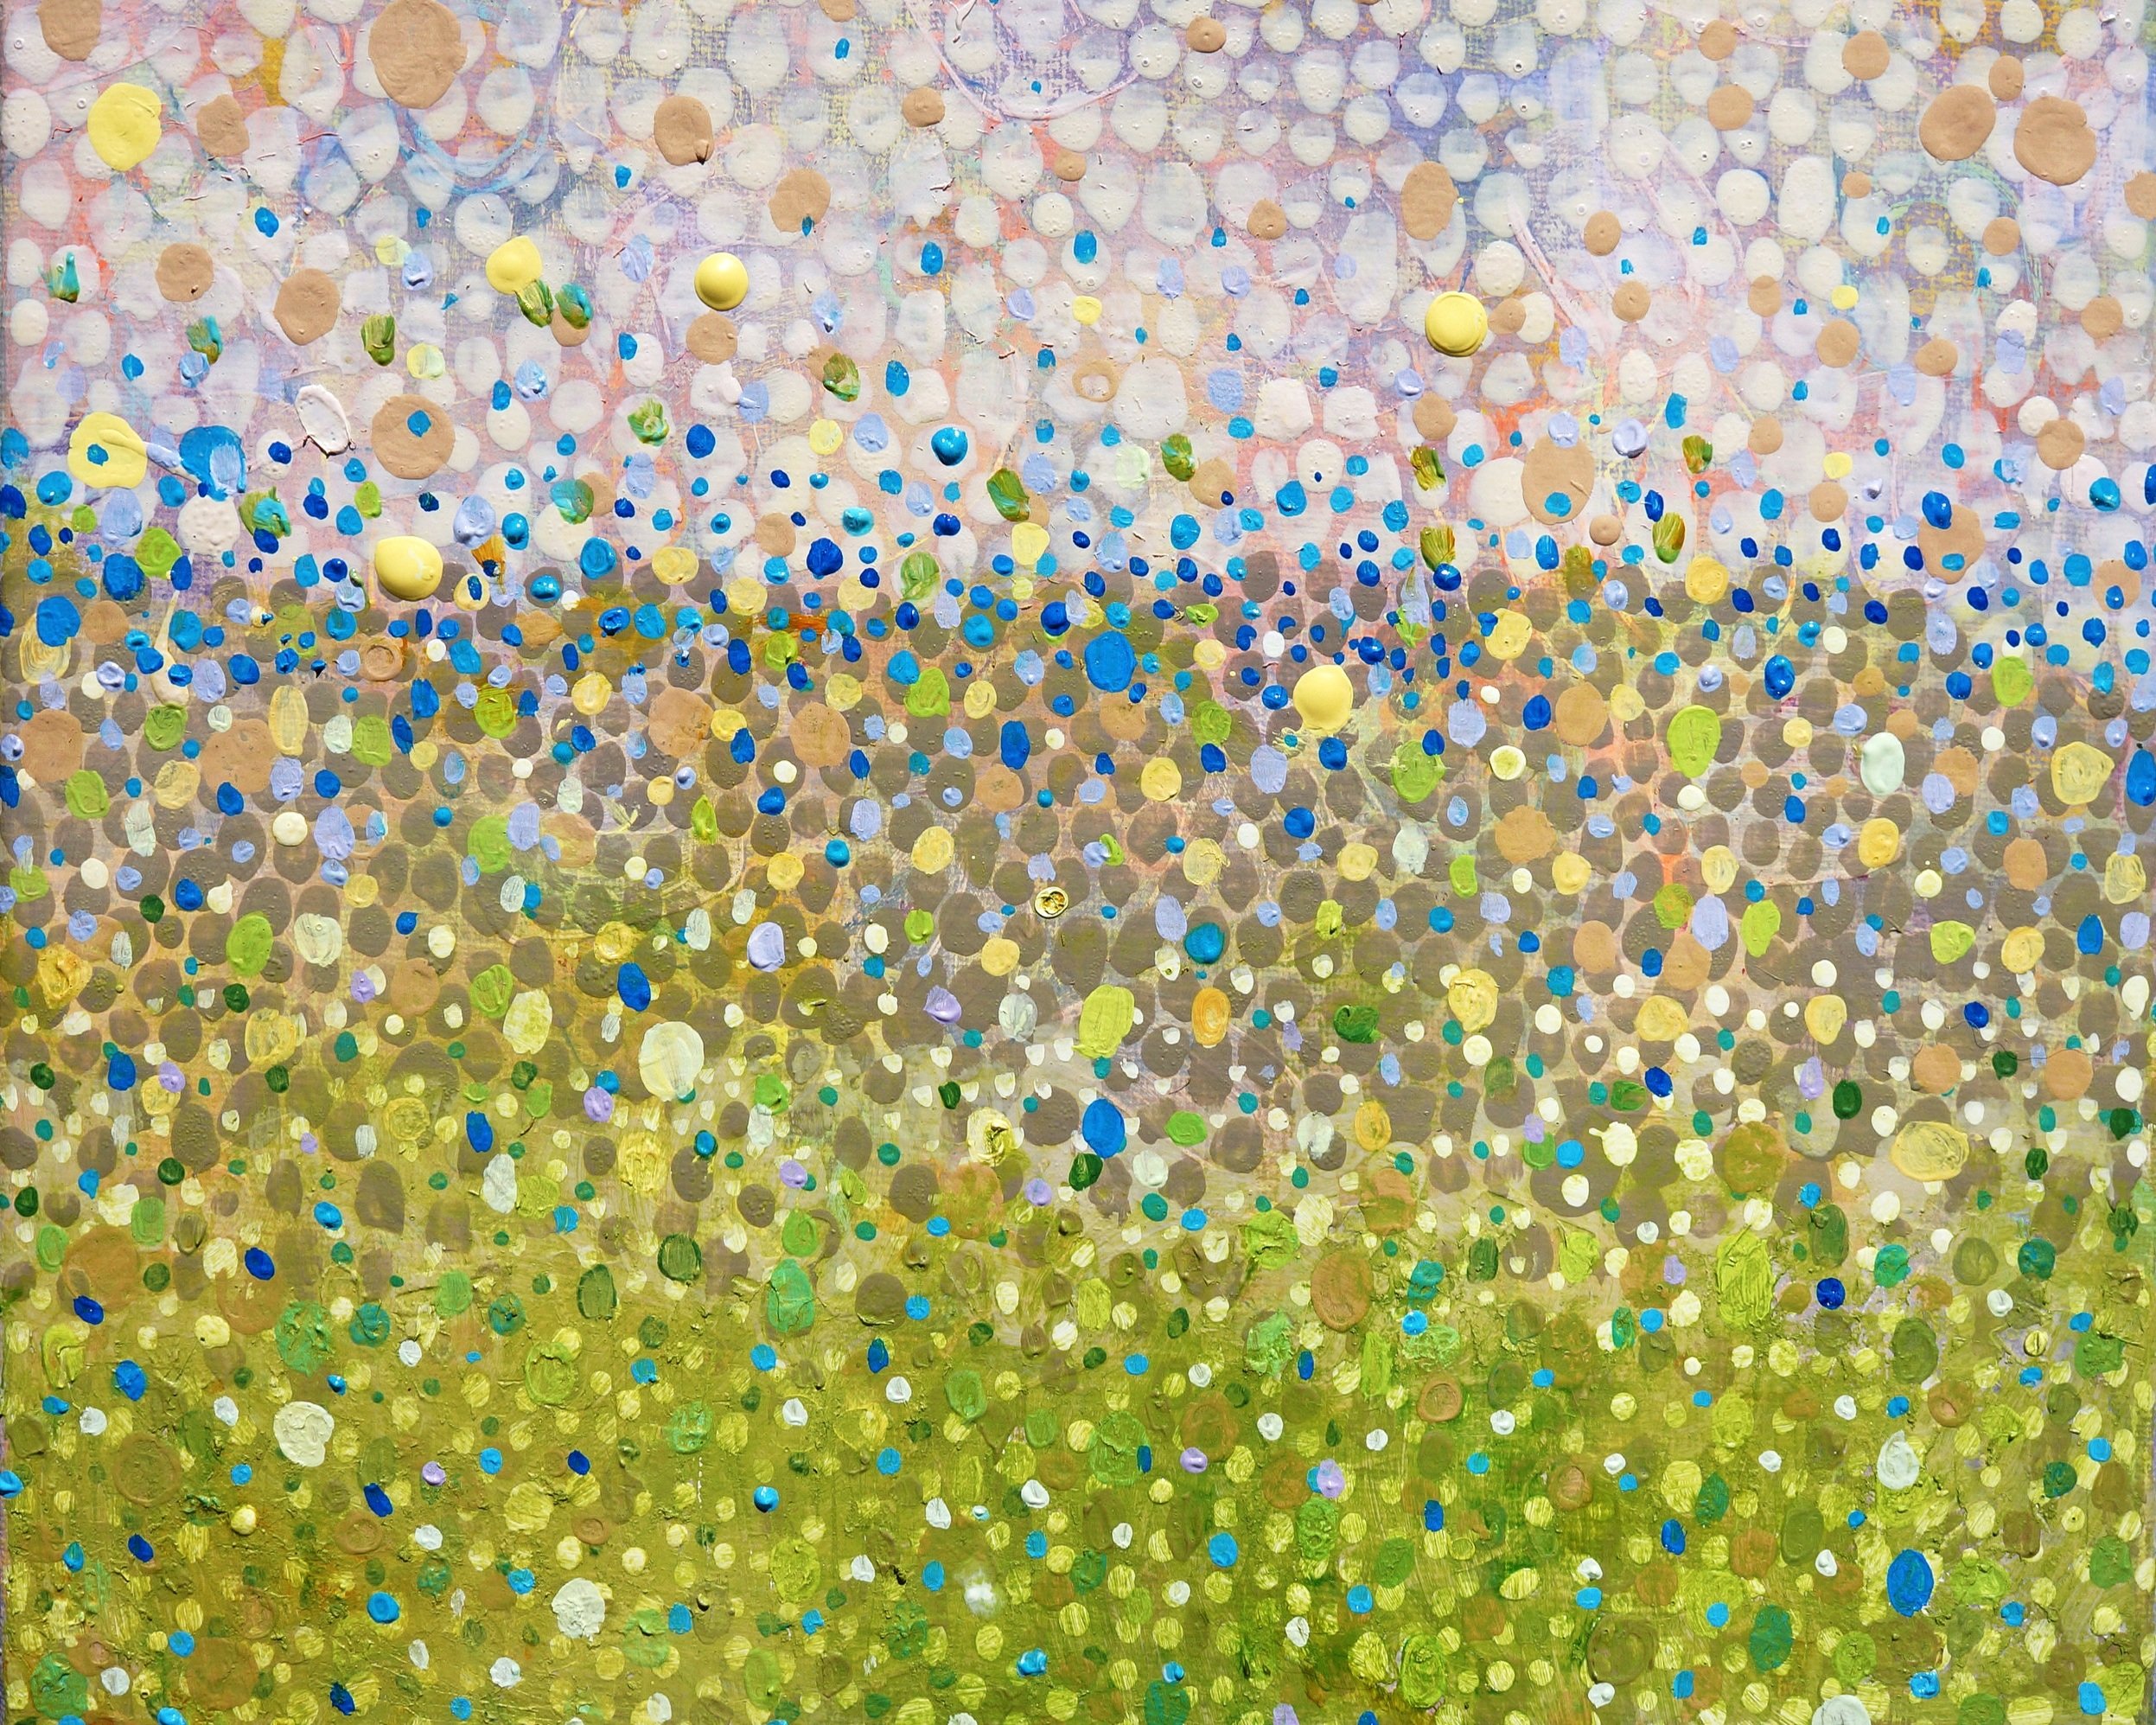 Field, 2017, acrylic & varnish on canvas, 12 x 12 inches